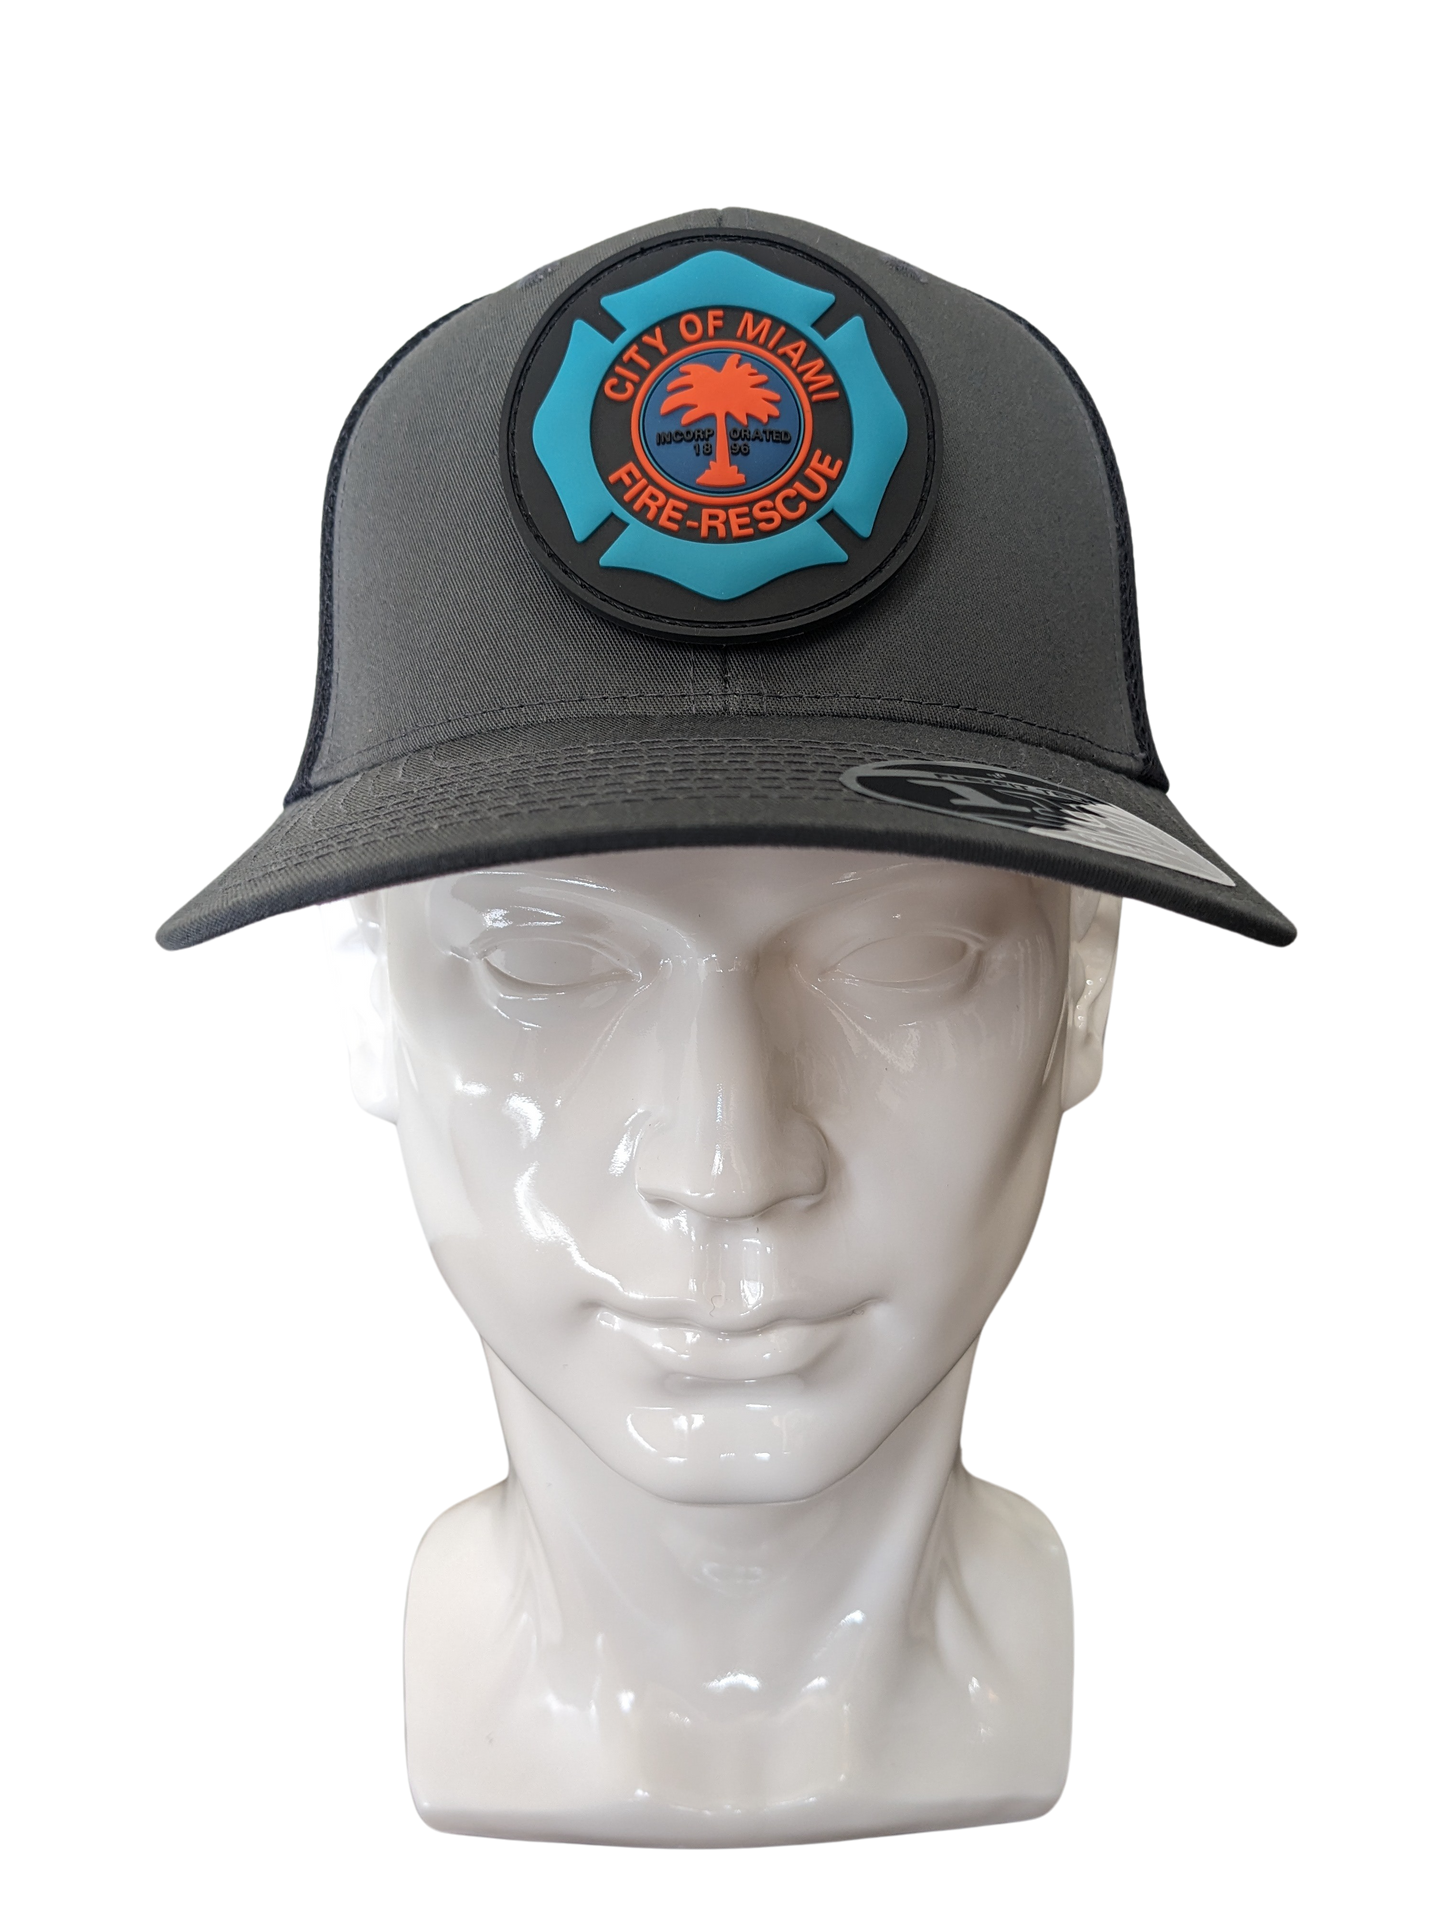 Miami Dolphins City of Miami Fire Rescue Removable PVC Patch Hat